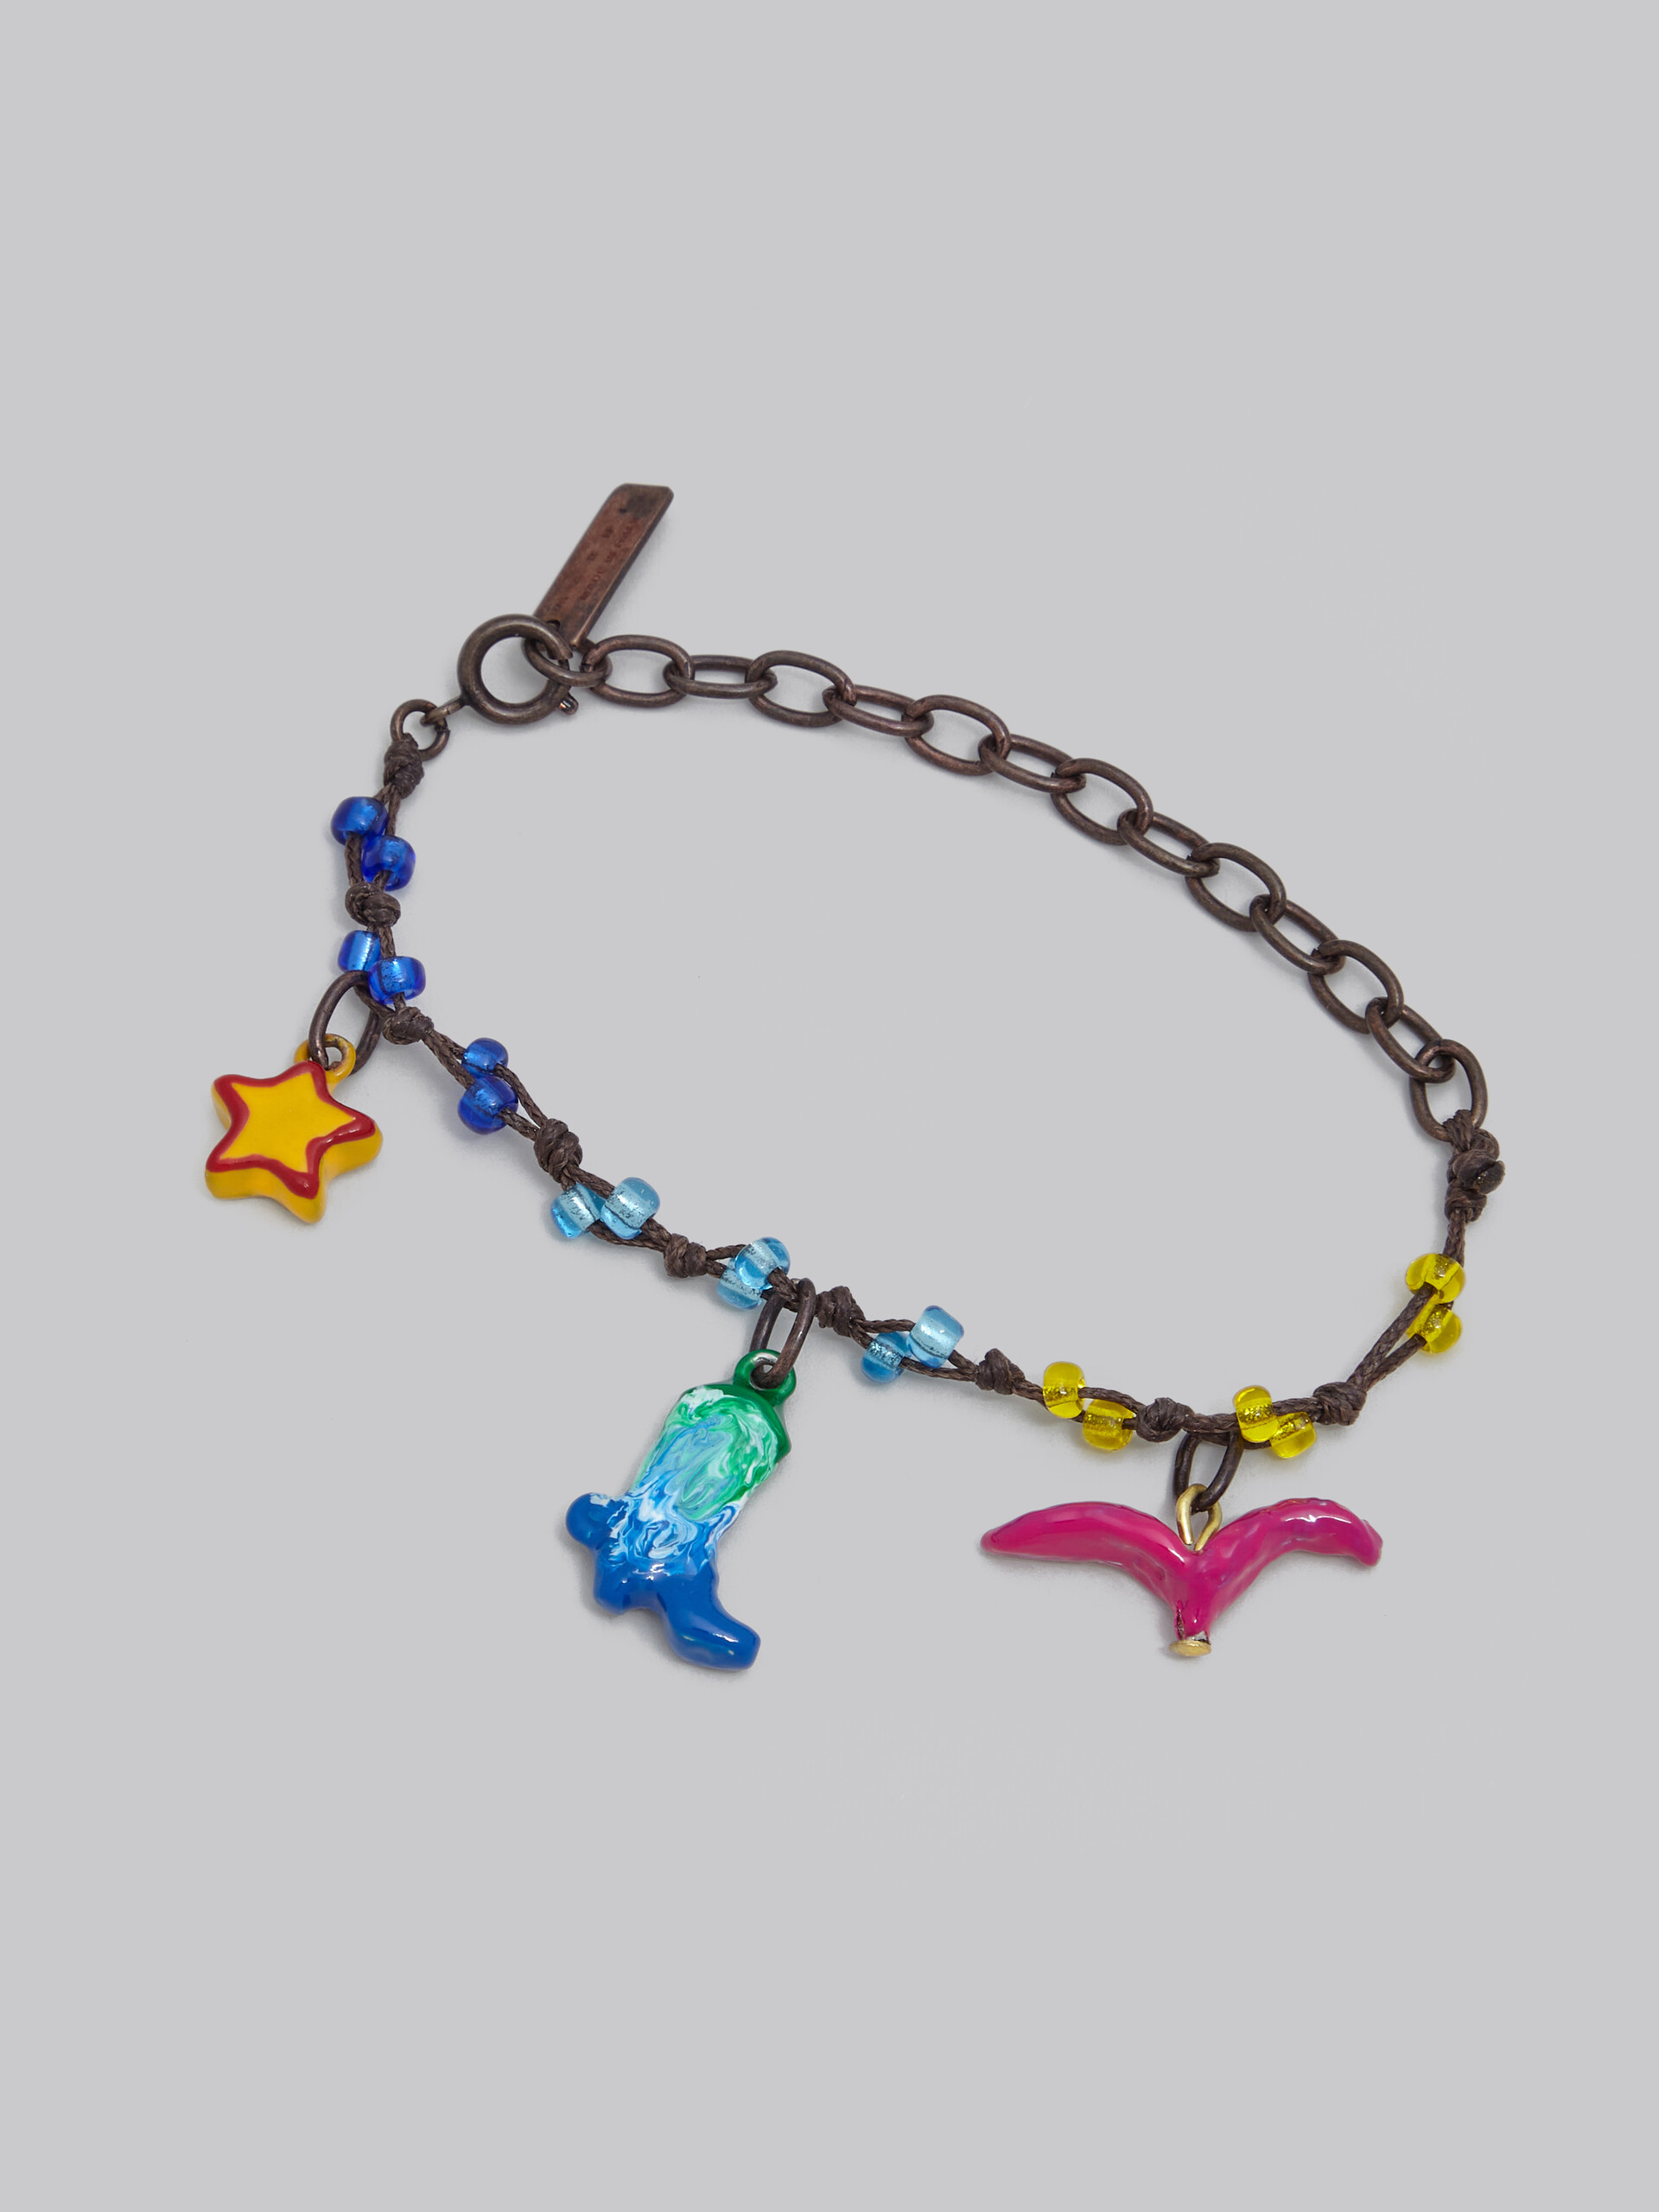 Marni x No Vacancy Inn - Bracelet with red blue and yellow pendants - Bracelets - Image 4